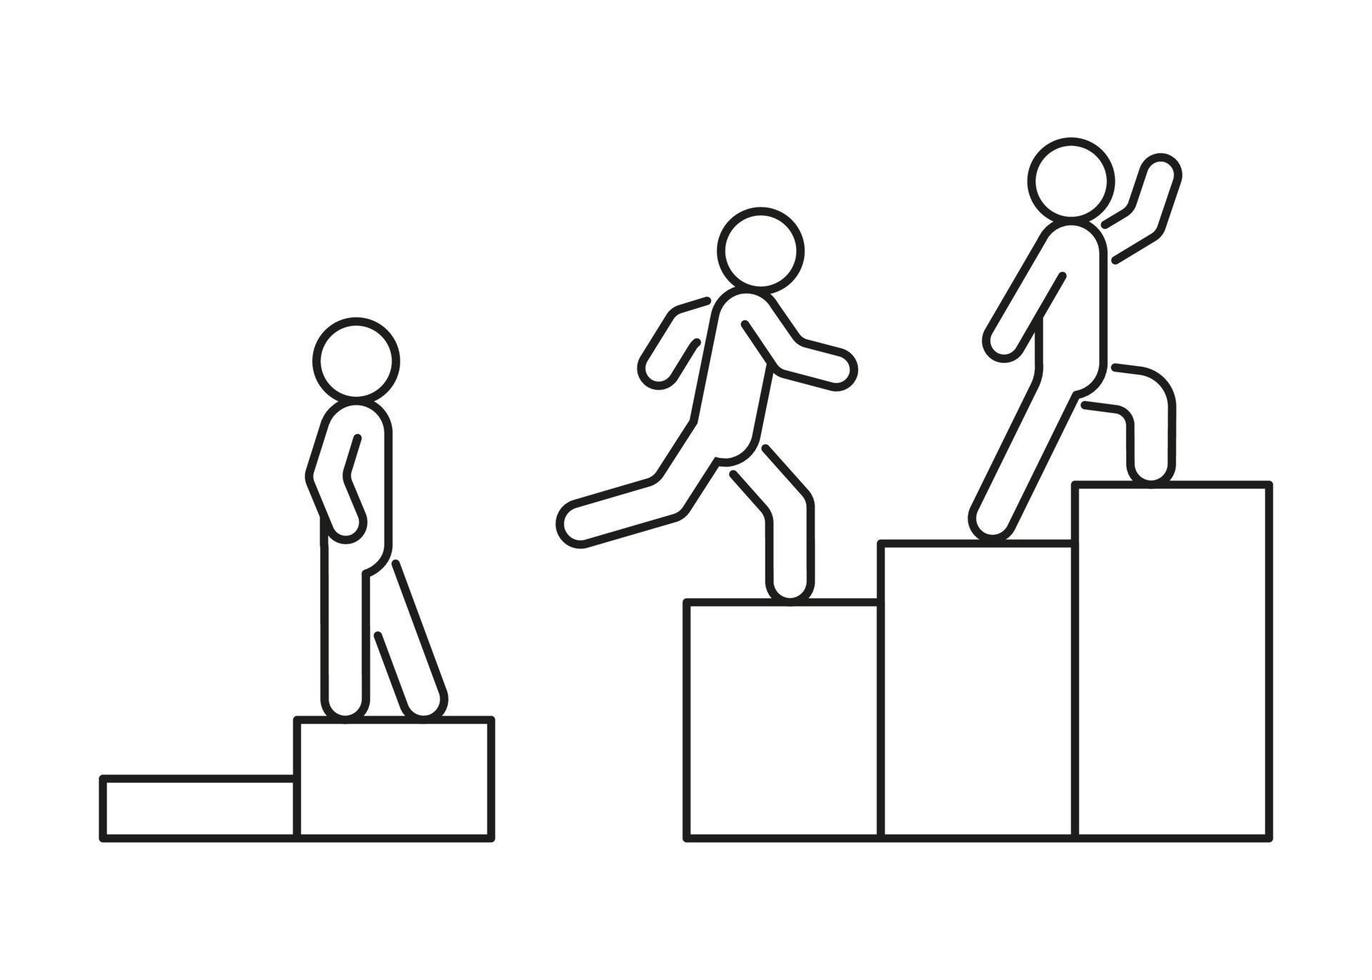 Progress skill worker, climbing stairs with obstacles, raising level in business, line art. Different levels of life on ladder. Achievement and success. Difficult path to goal. Vector illustration